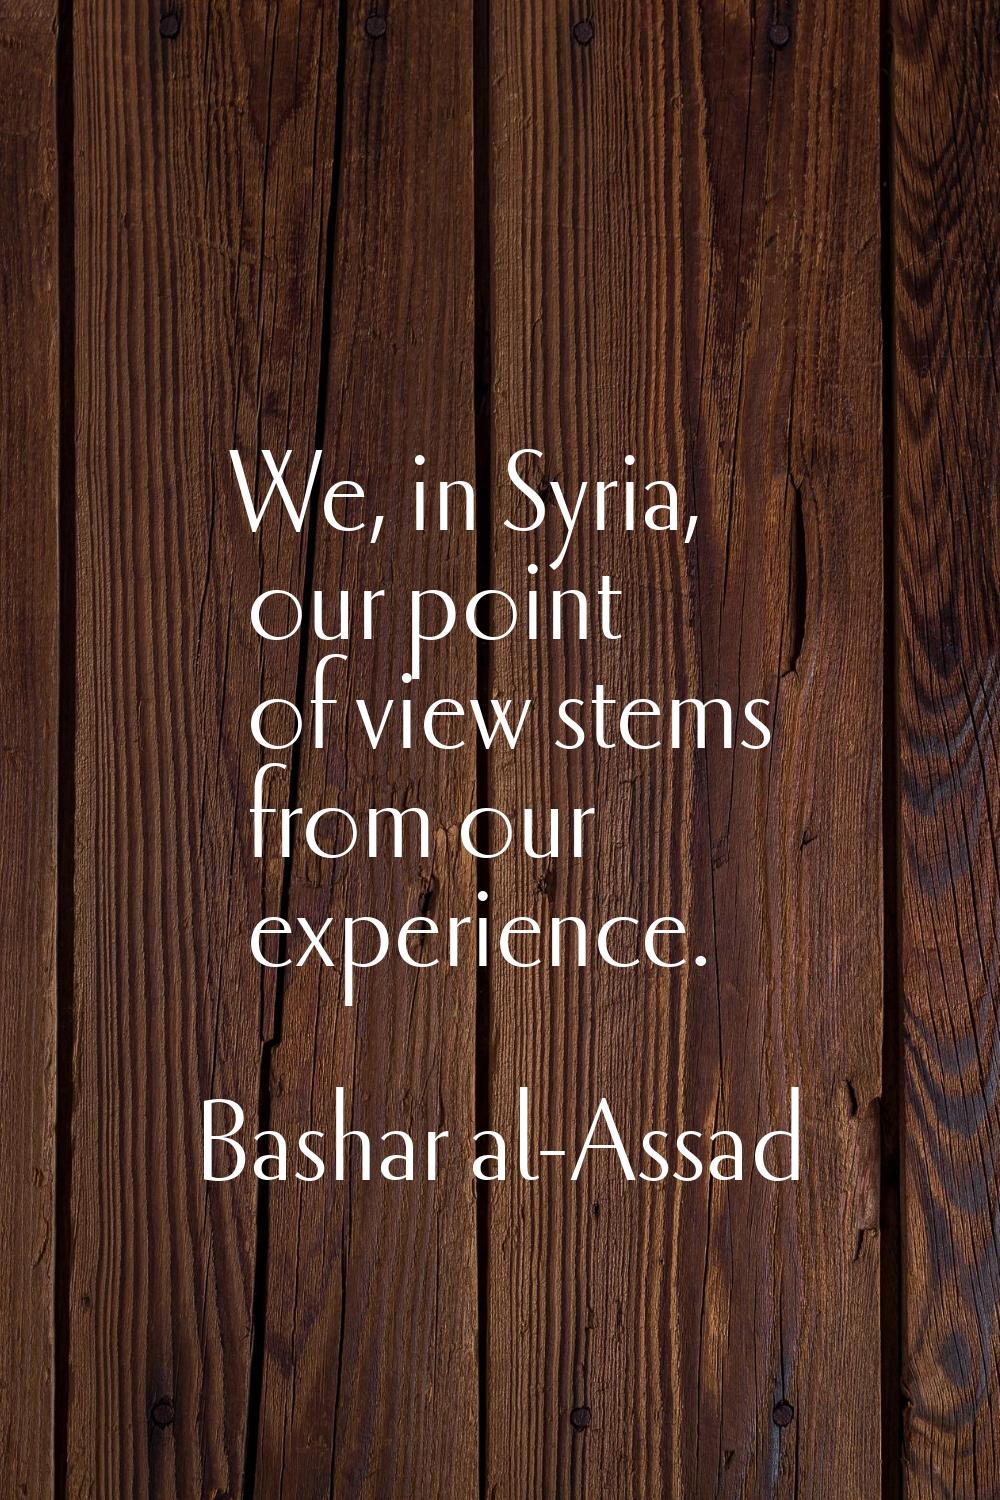 We, in Syria, our point of view stems from our experience.